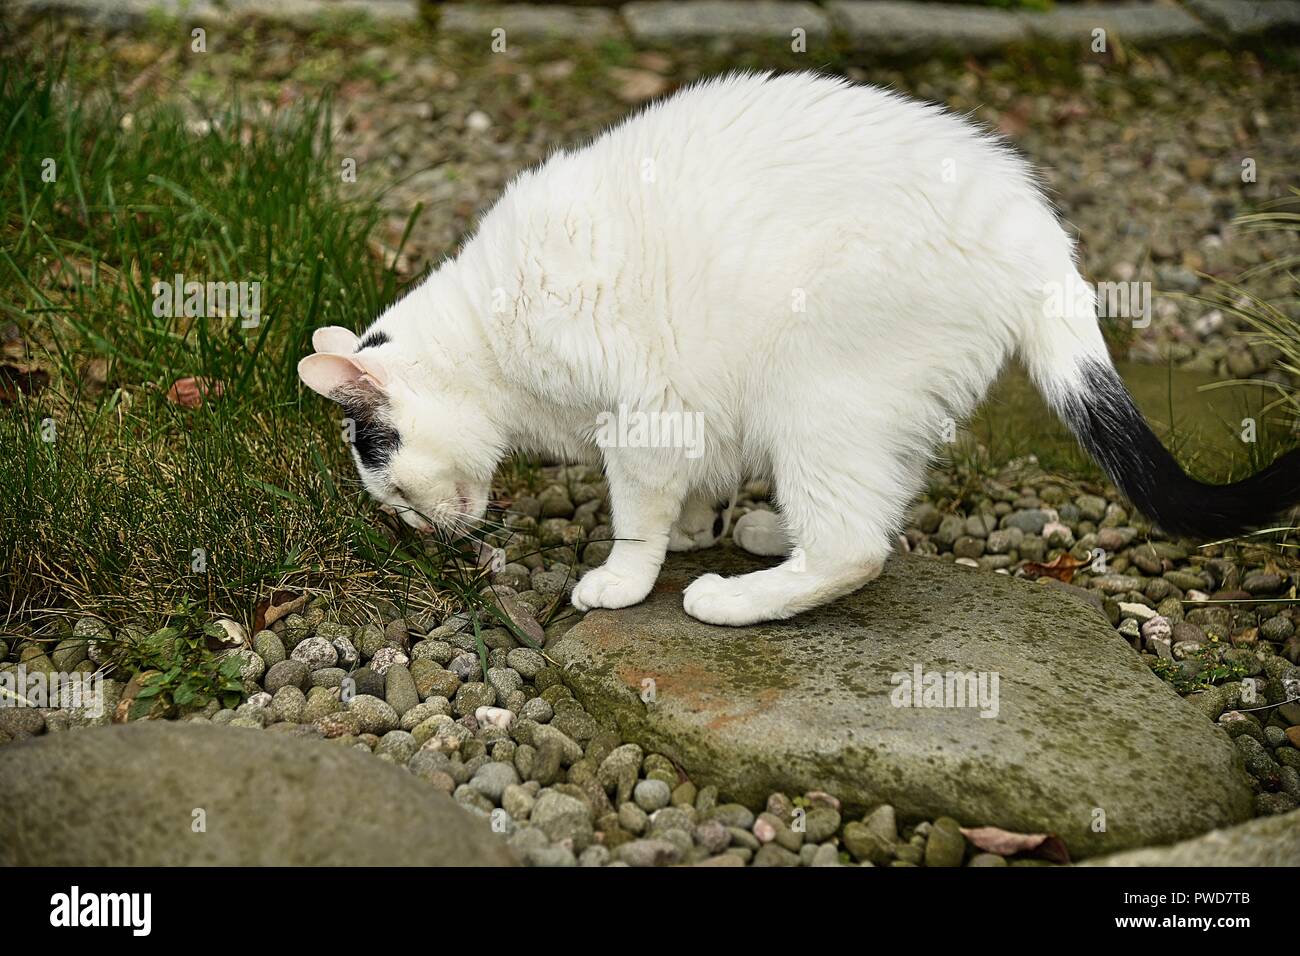 A white cat with black spots eats grass in the back yard Stock Photo